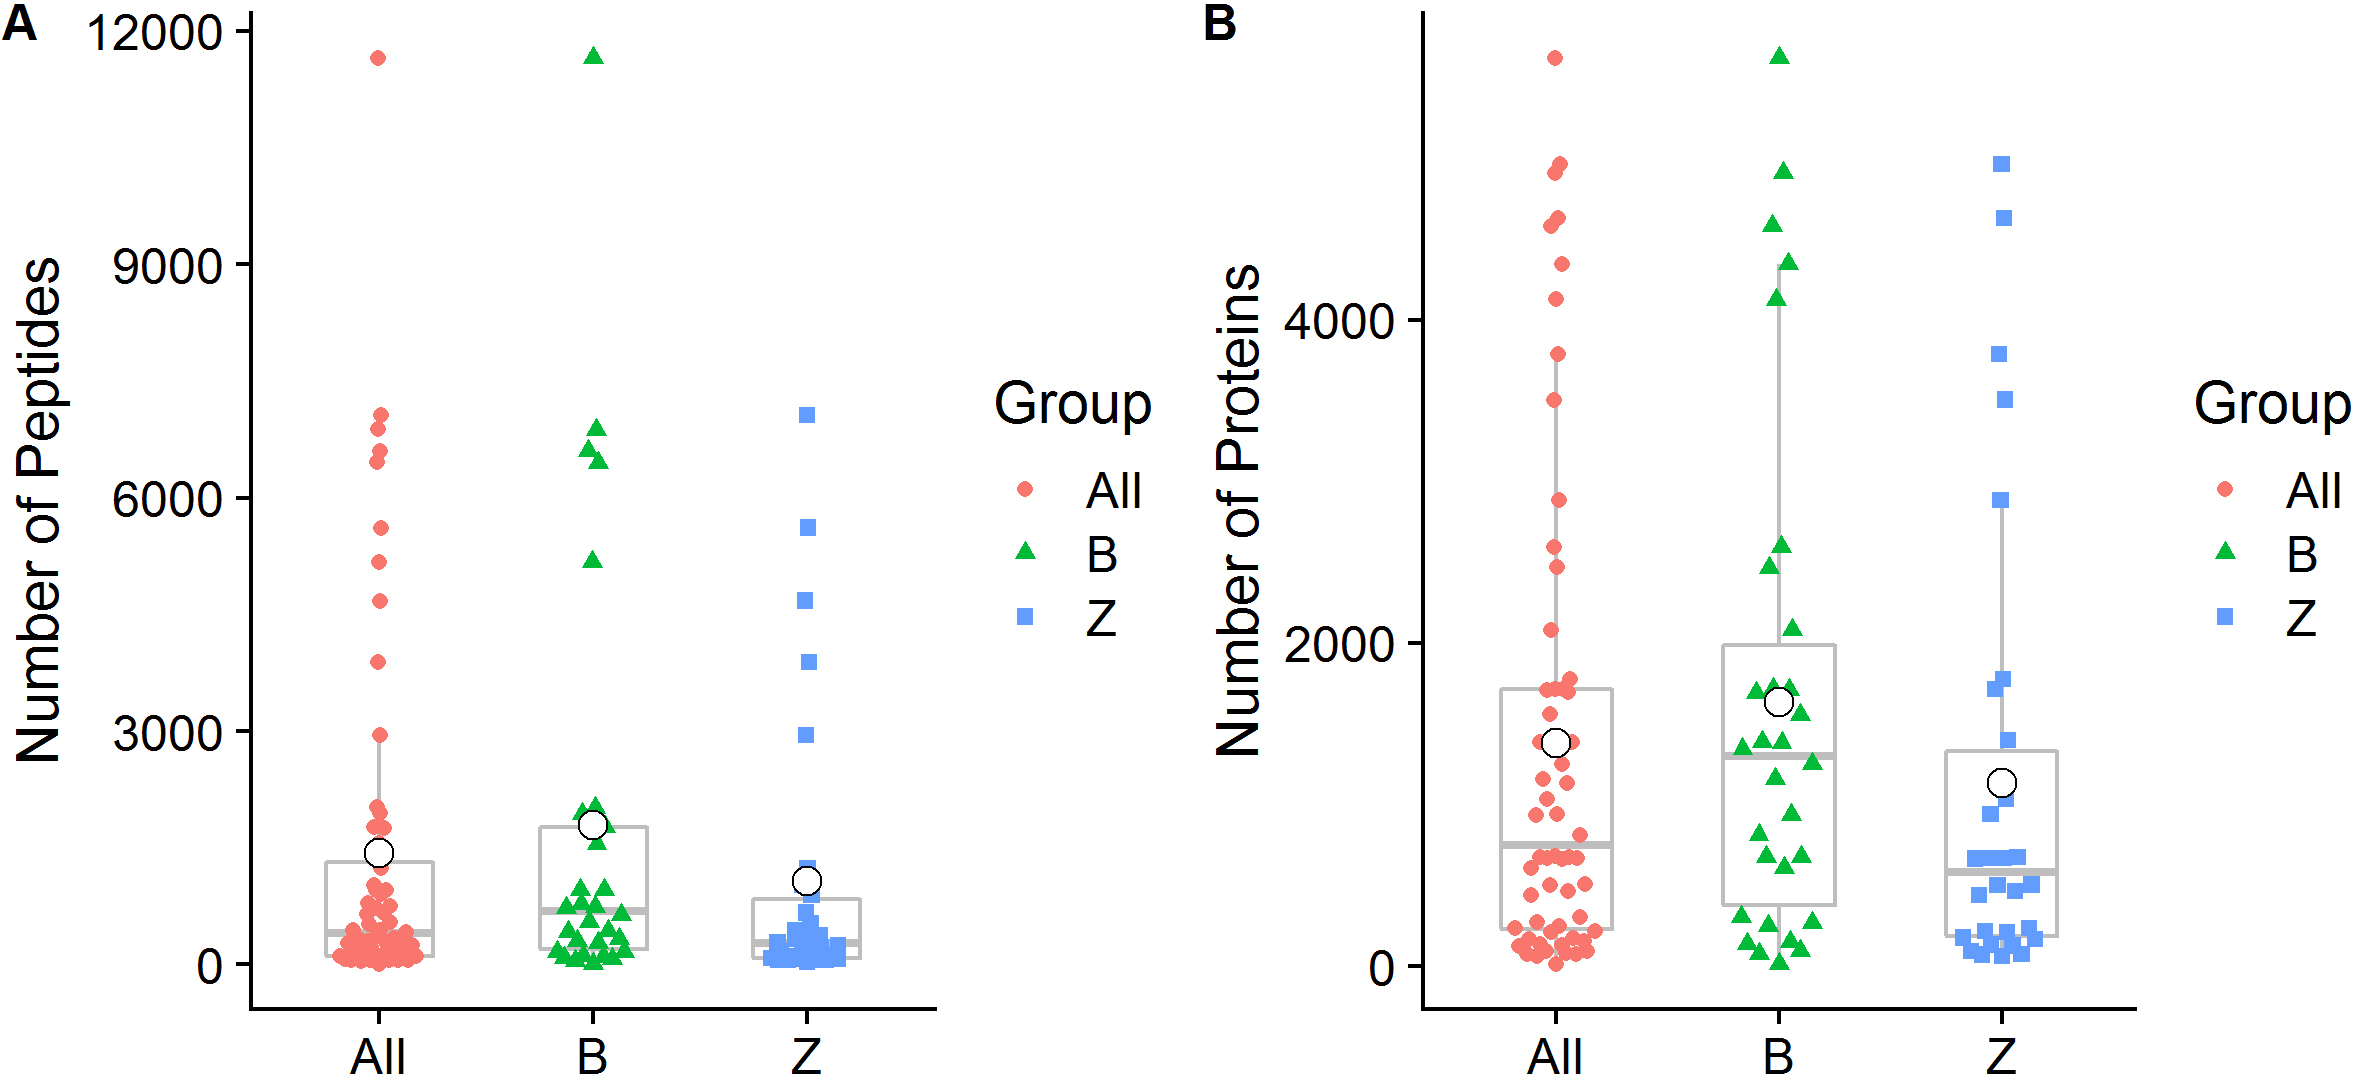 Peptide and protein group identification by oral metaproteomics. (A) Box plot representations of the number of peptides identified in the present study. (B) Box plot representations of the number of identified proteins. Different colors of the symbols are used to represent individual samples, and the median (central lines), mean (white small dot), 25% and 75% quartile ranges (box width), and upper and lower limits (asterisk) are shown. All: All samples from 30 OSCC patients; B: Swabs of lesion surfaces; Z: Contralateral normal mucosa.